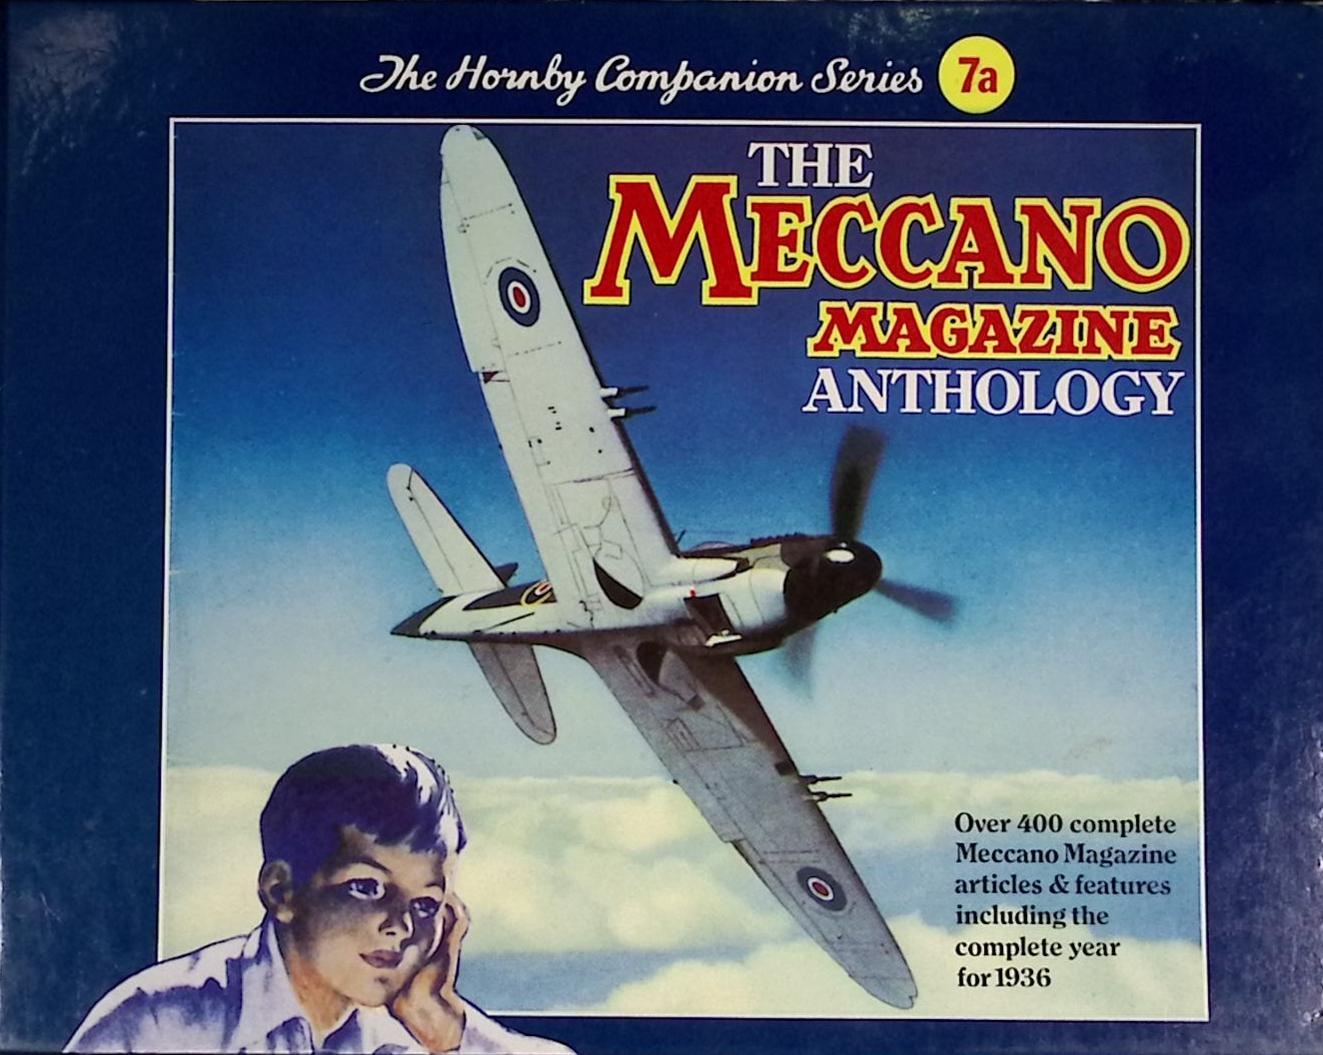 The Meccano Magazine Anthology. The Hornby Companion Series. Volume 7a.